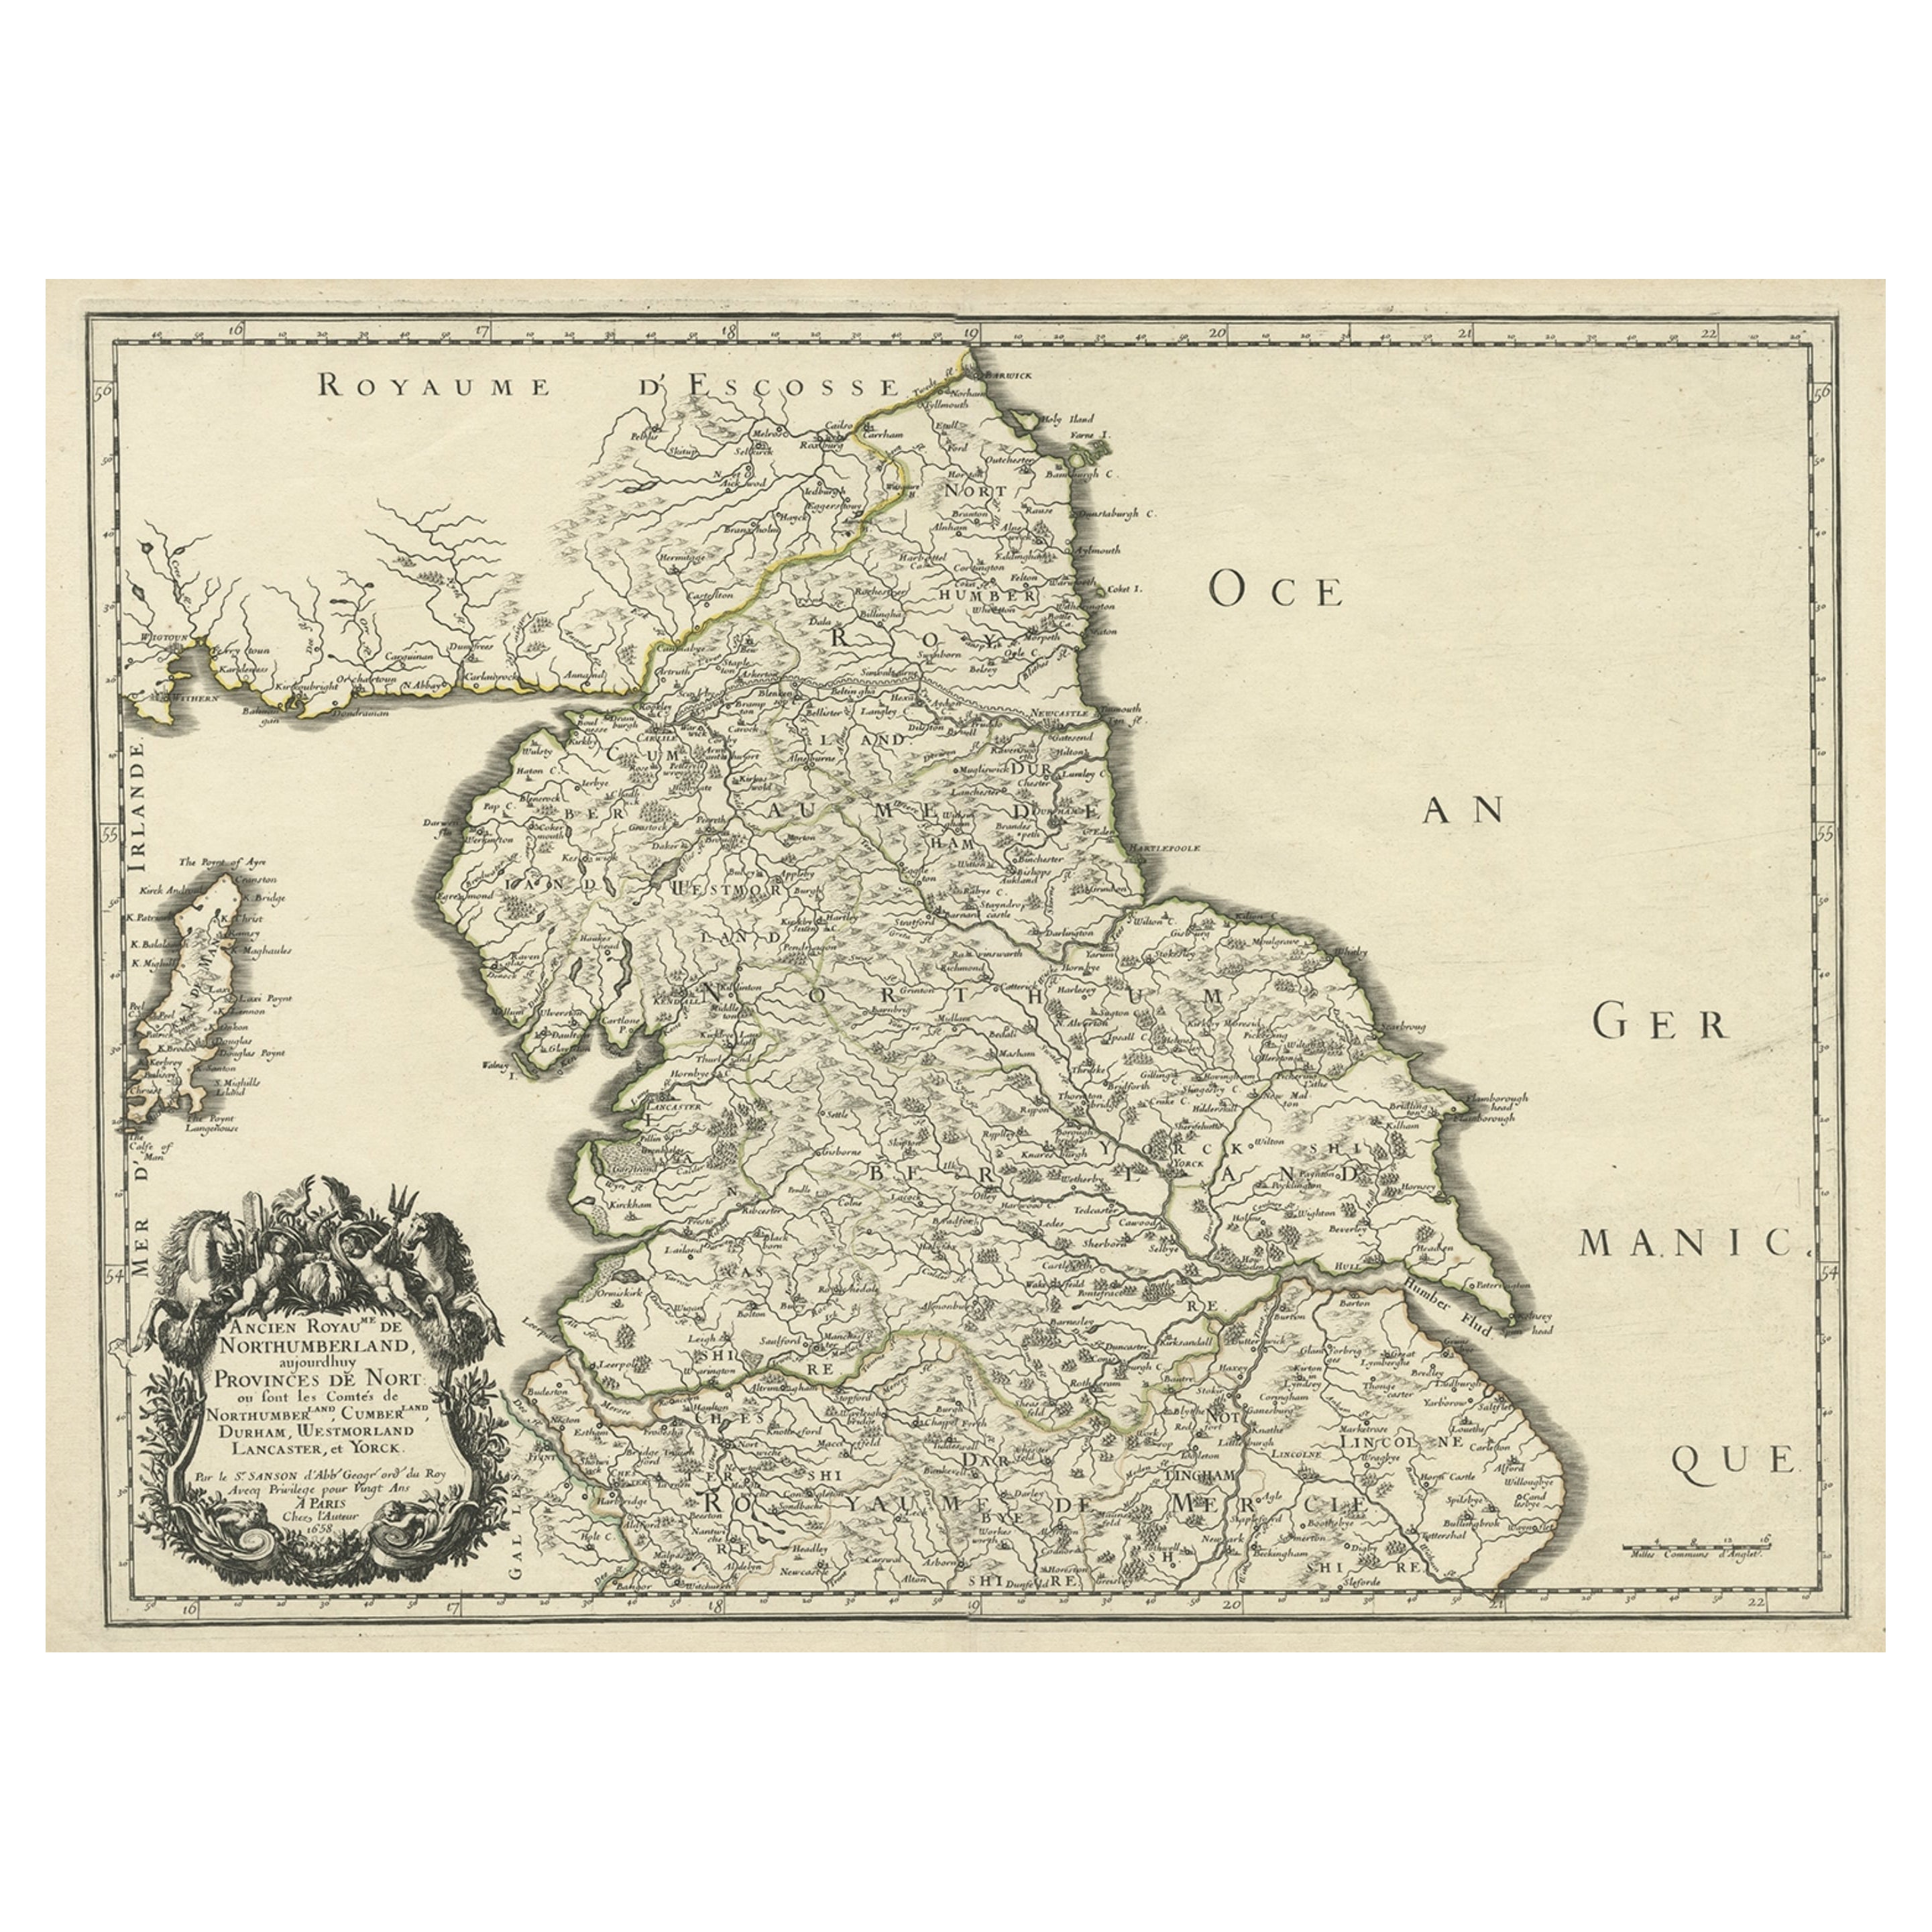 Engraved Map of Northern England, Focusing on Northumberland, 1658